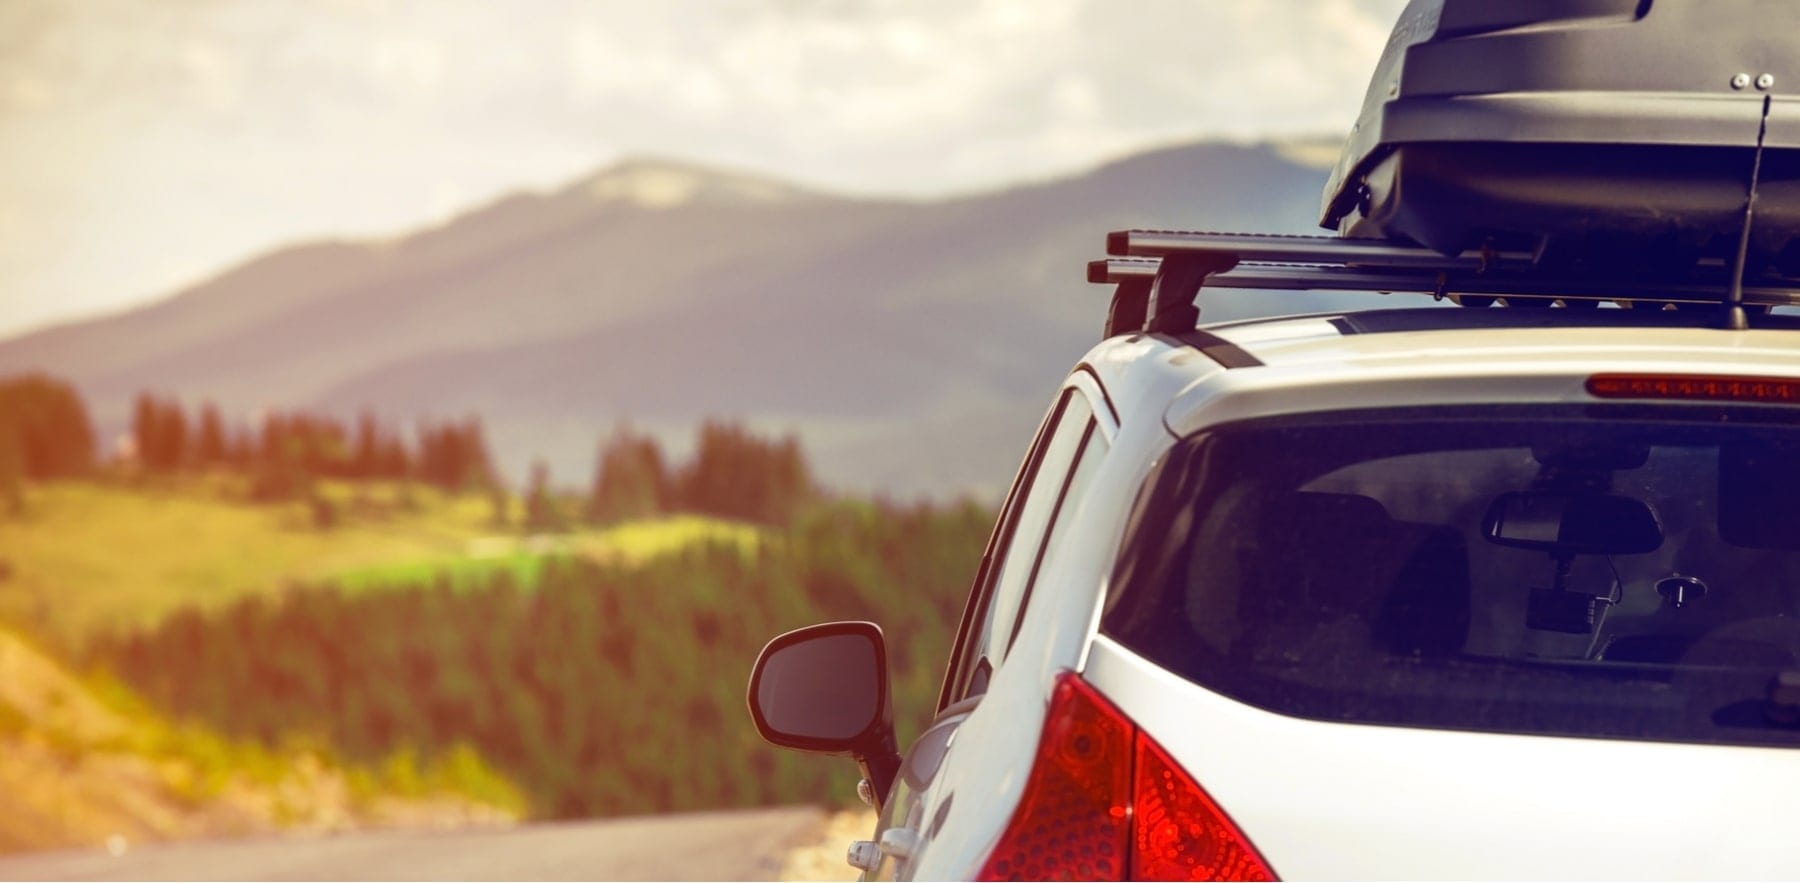 How to pick a roof rack for your 4wd